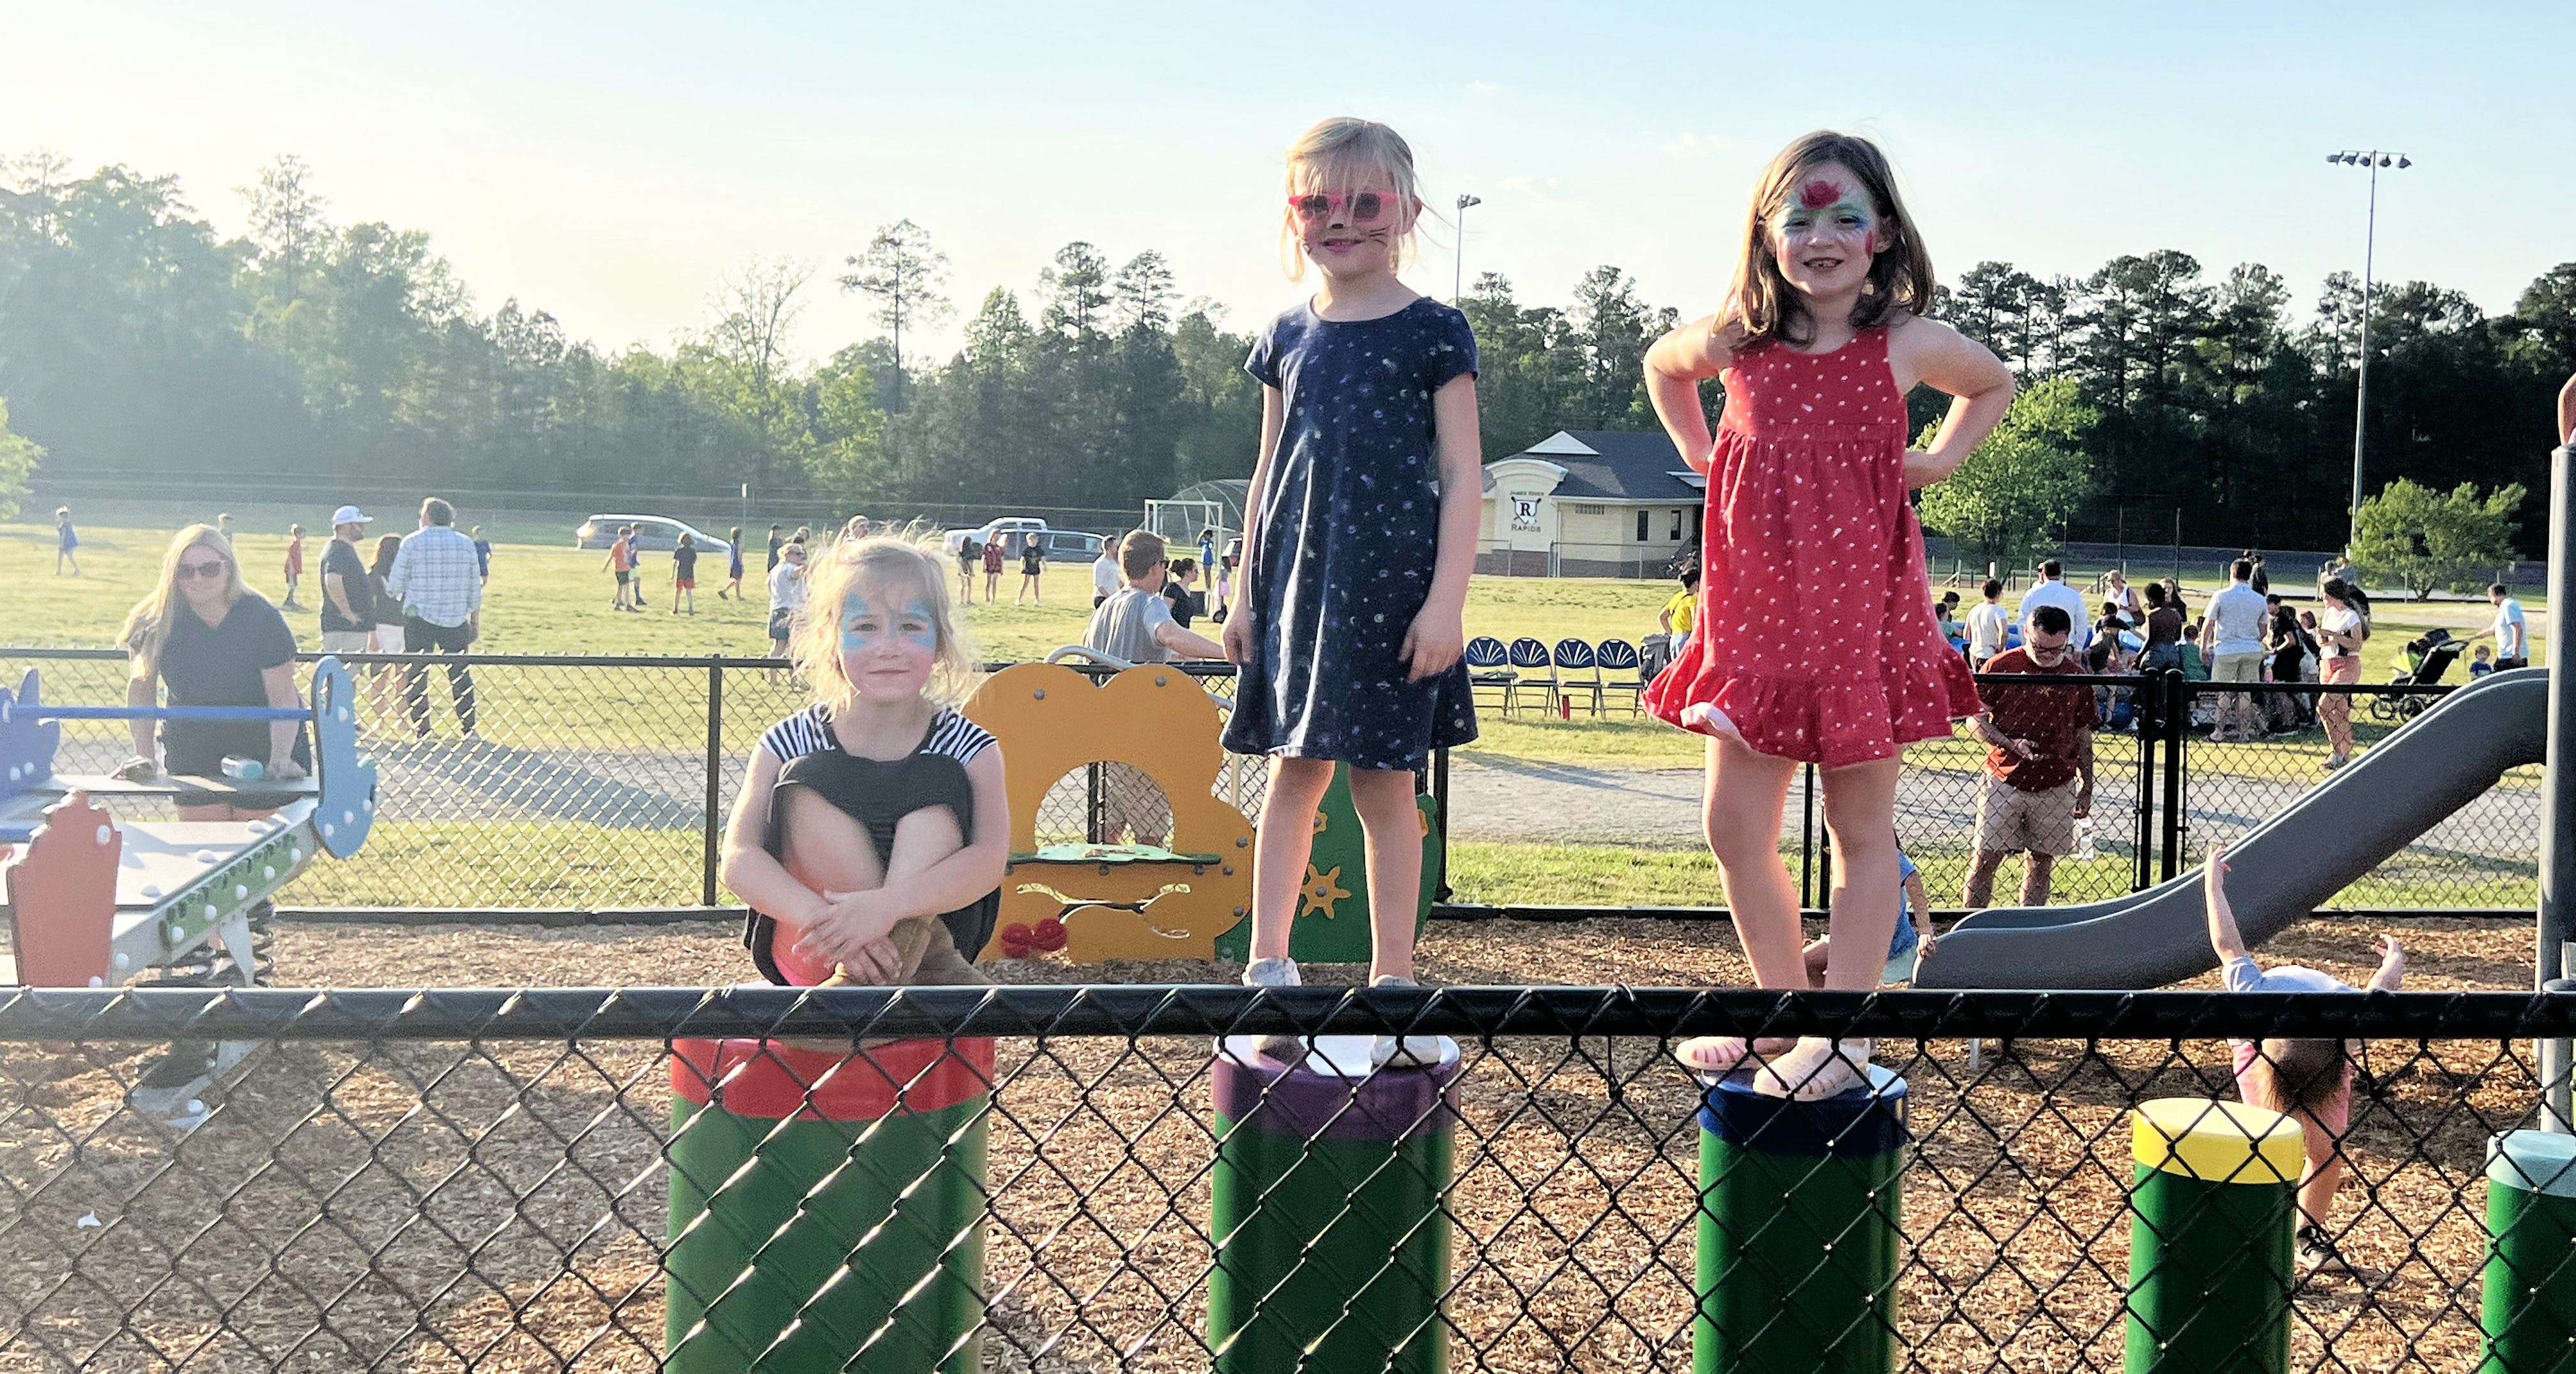 Three students standing on risers on the playground